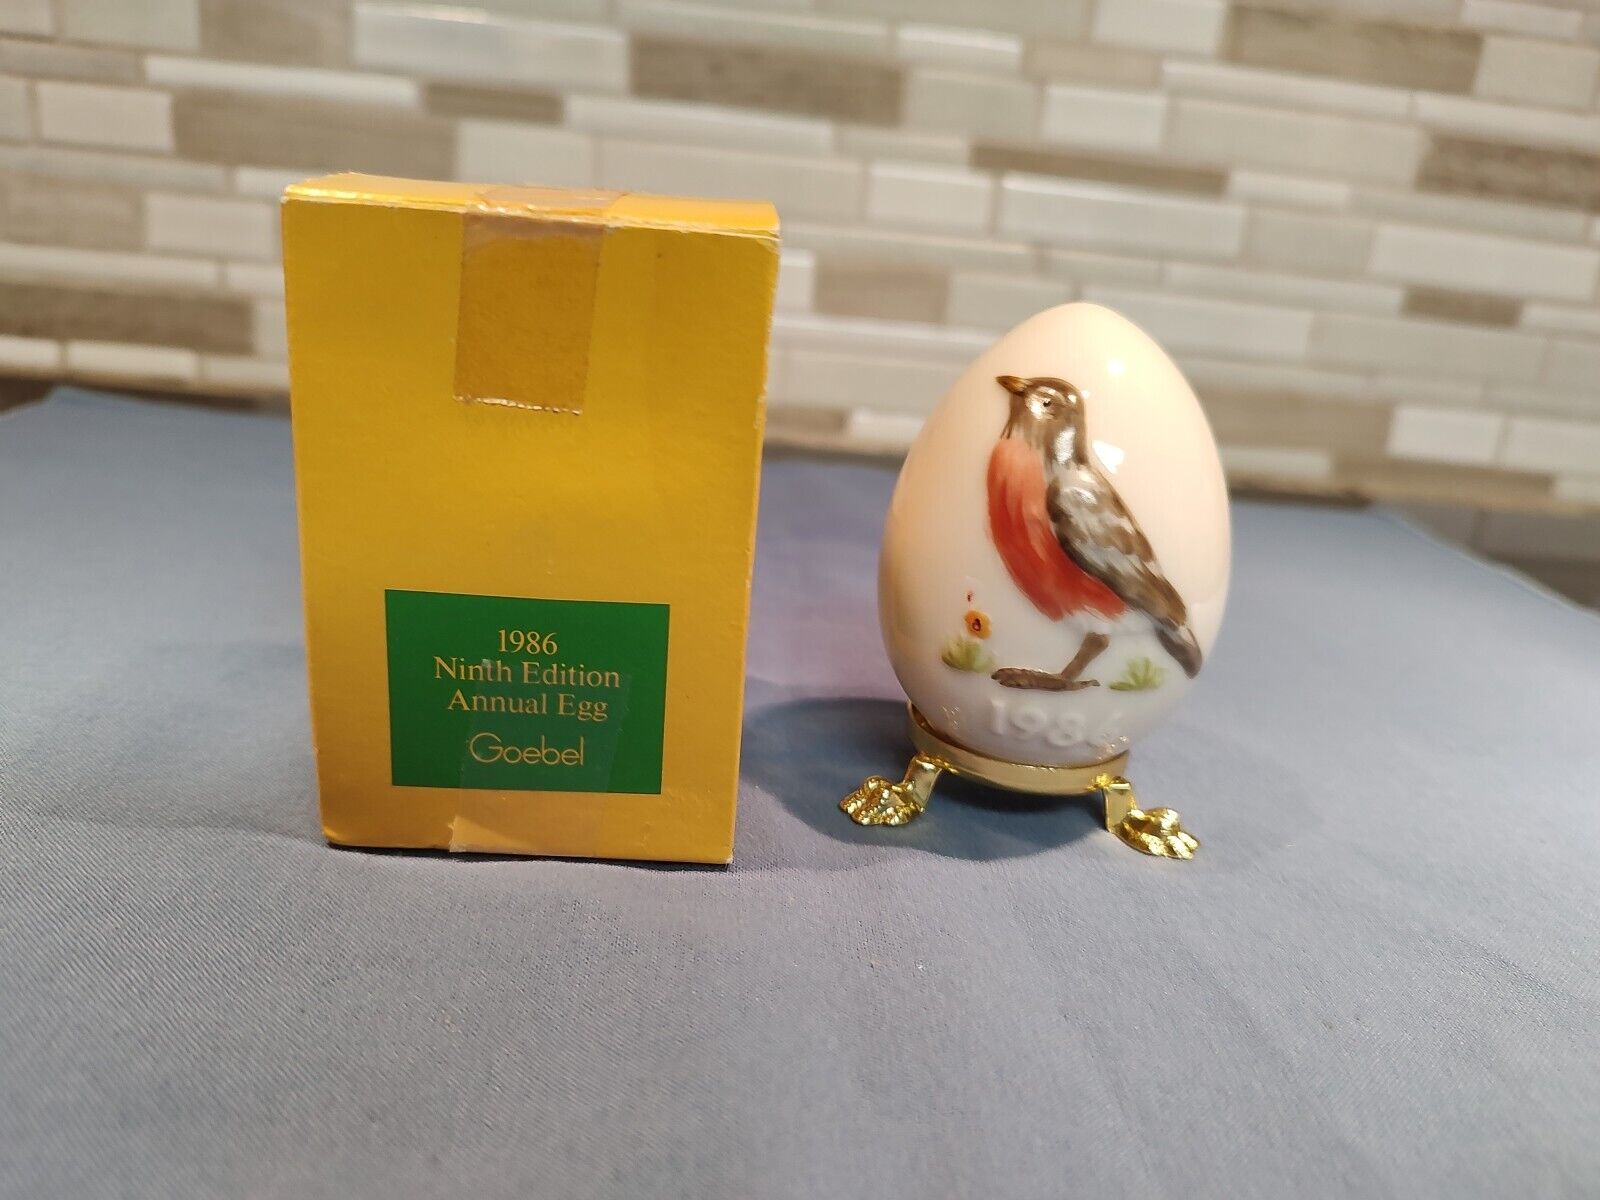 Goebel Ninth Edition 1986 Annual Easter Egg Red Robin - New in box